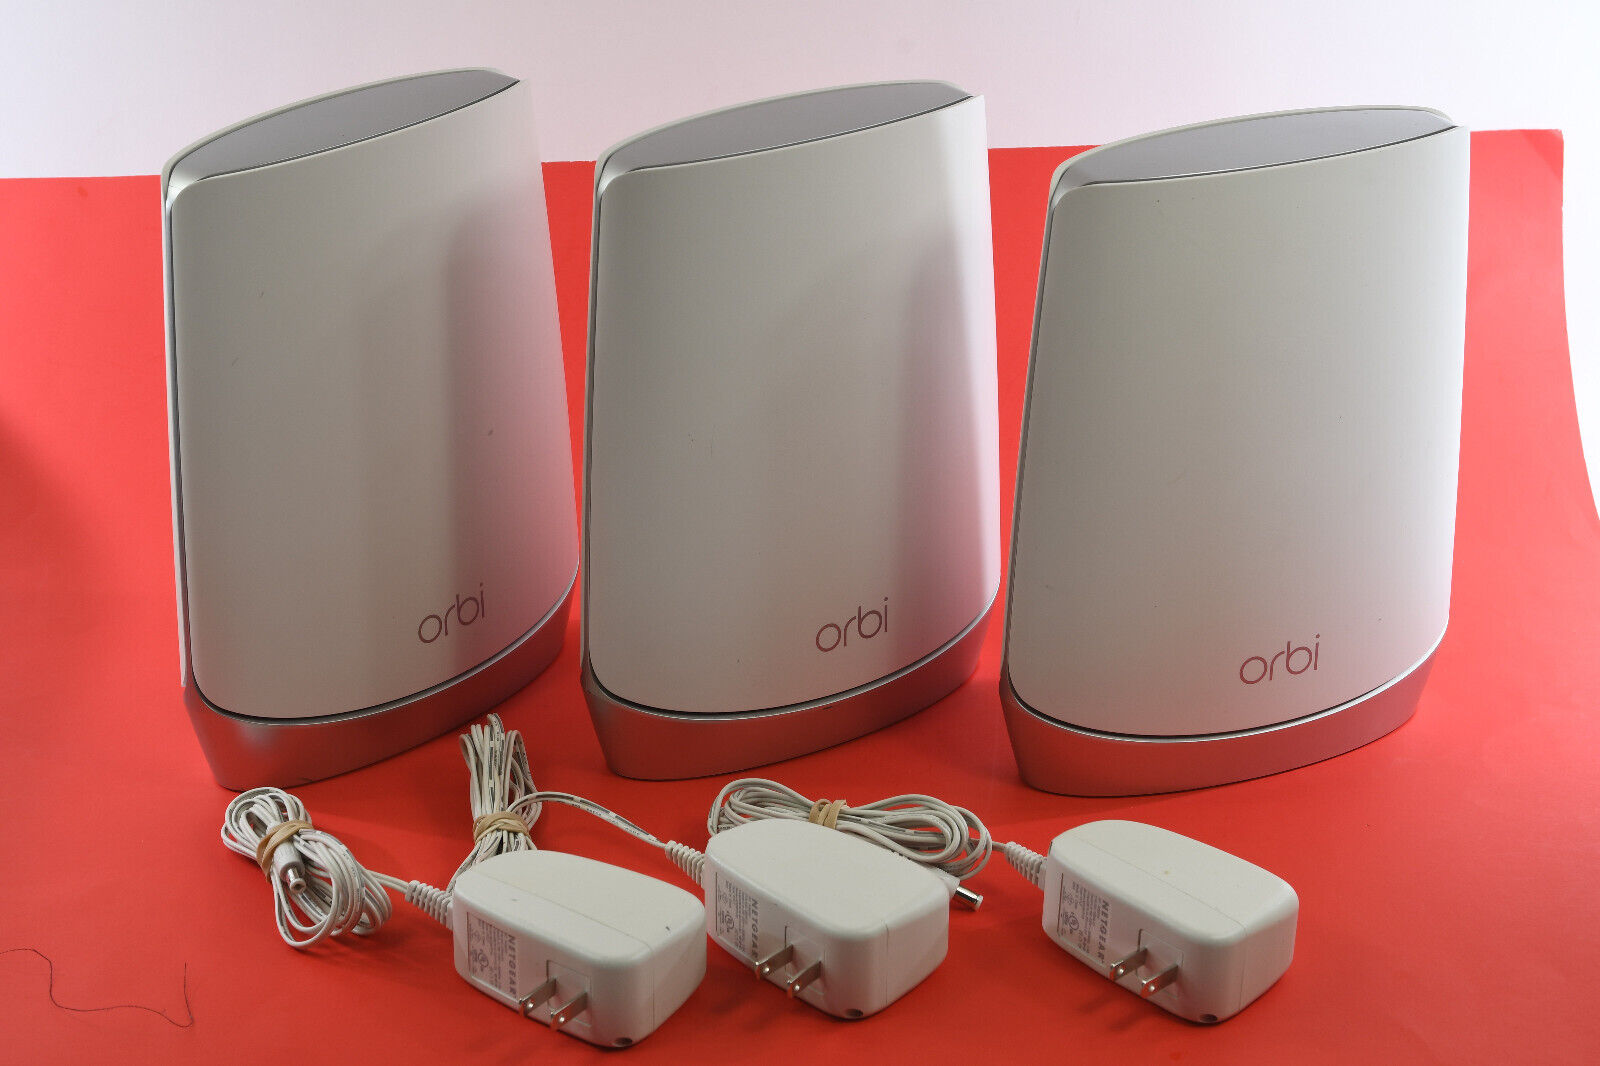 Netgear Orbi RBR750 router and two RBS750 satellites